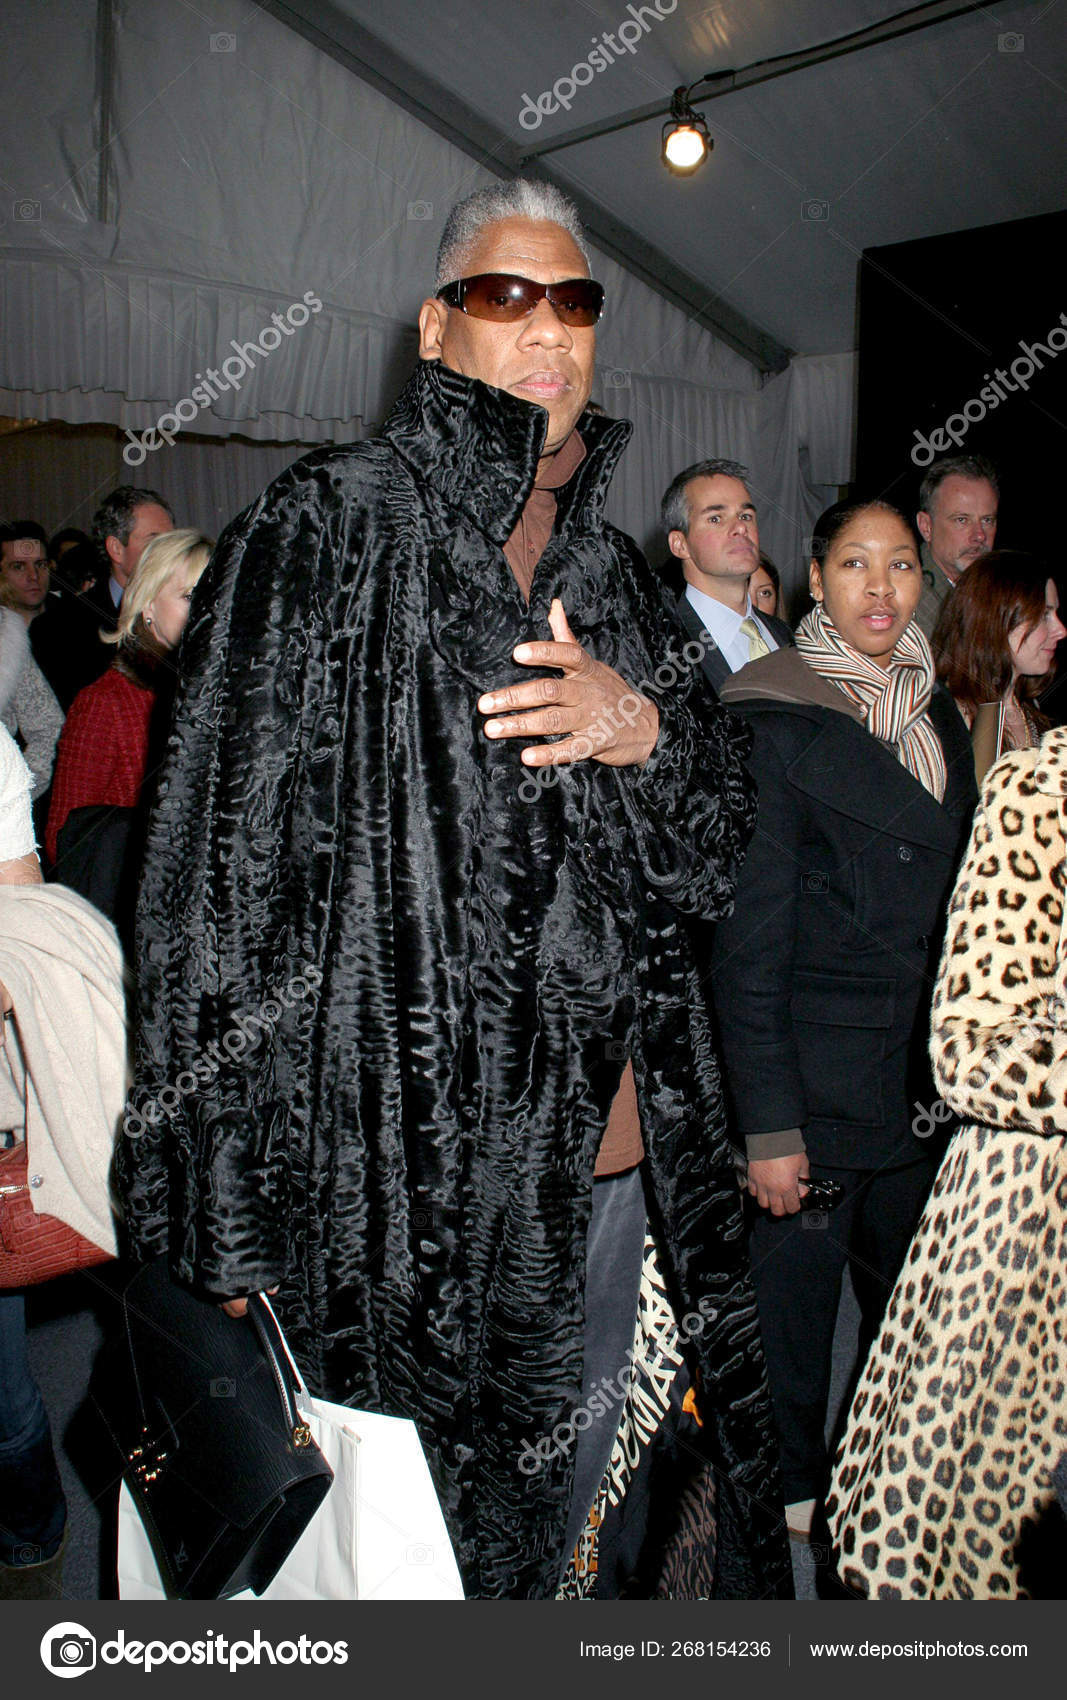 Andre Leon Talley Carrying Louis Vuitton Attache Case Fashion Show – Stock  Editorial Photo © everett225 #268154236